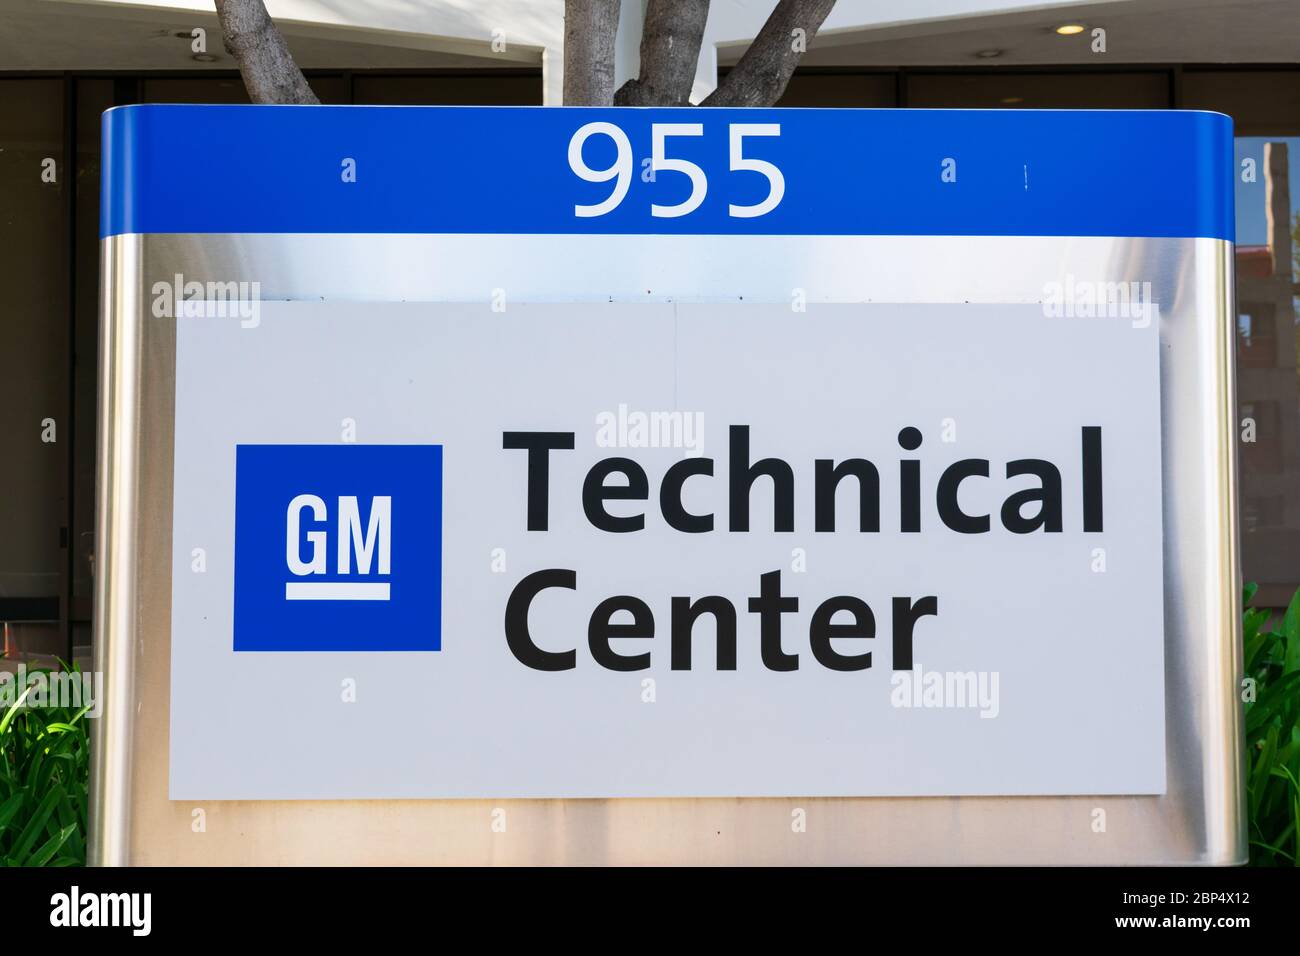 General Motors, GM, logo at Silicon Valley Technical Center campus - Sunnyvale, CA, USA - 2020 Stock Photo